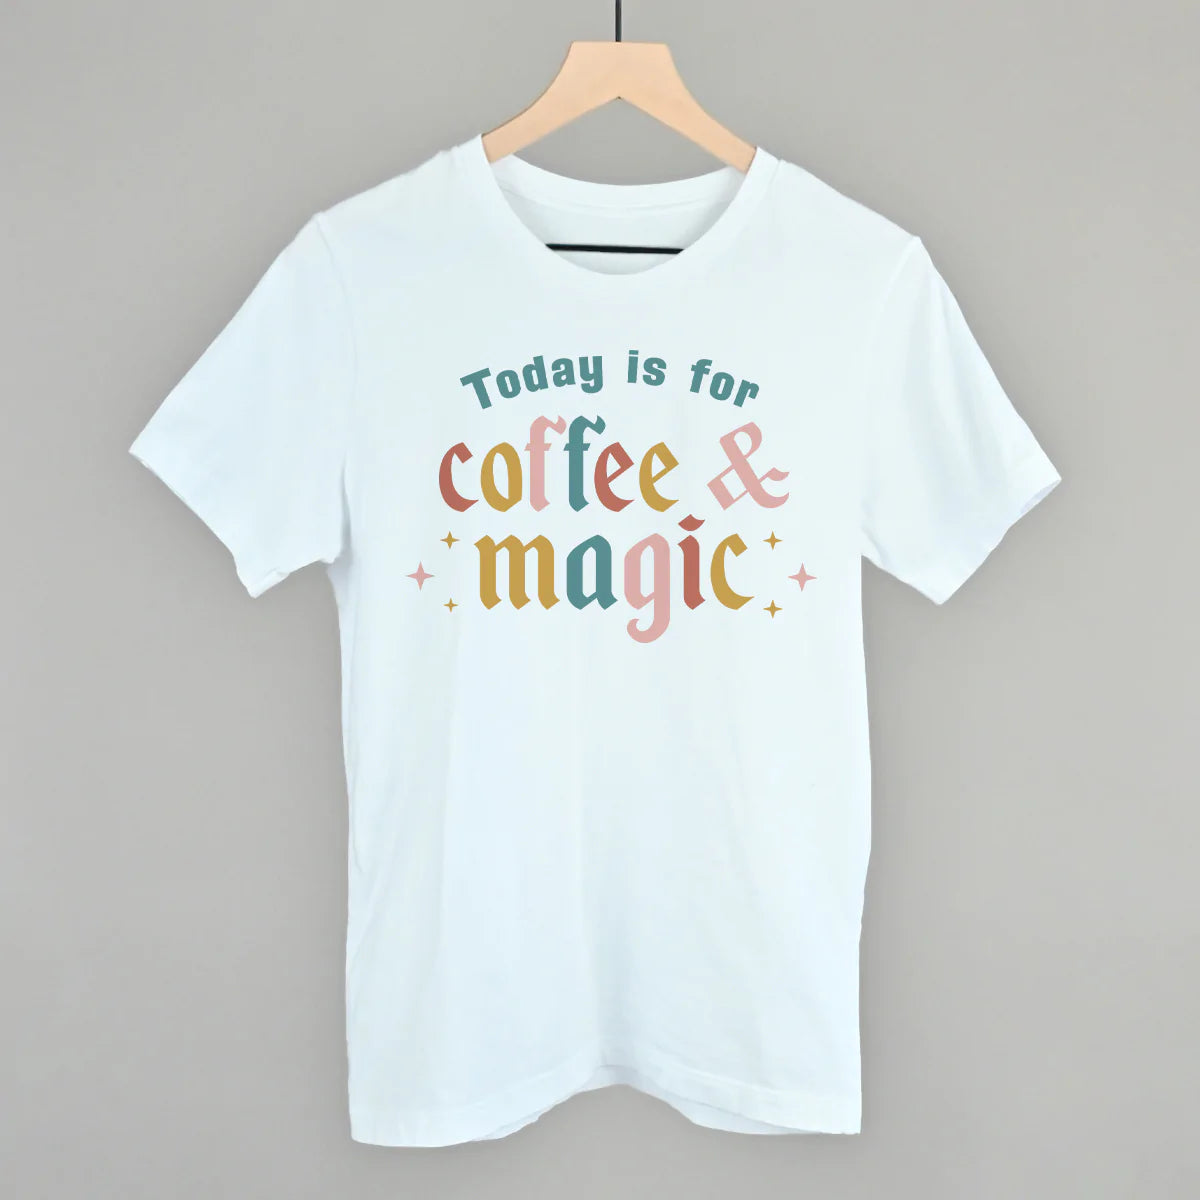 Today is for Coffee and Magic